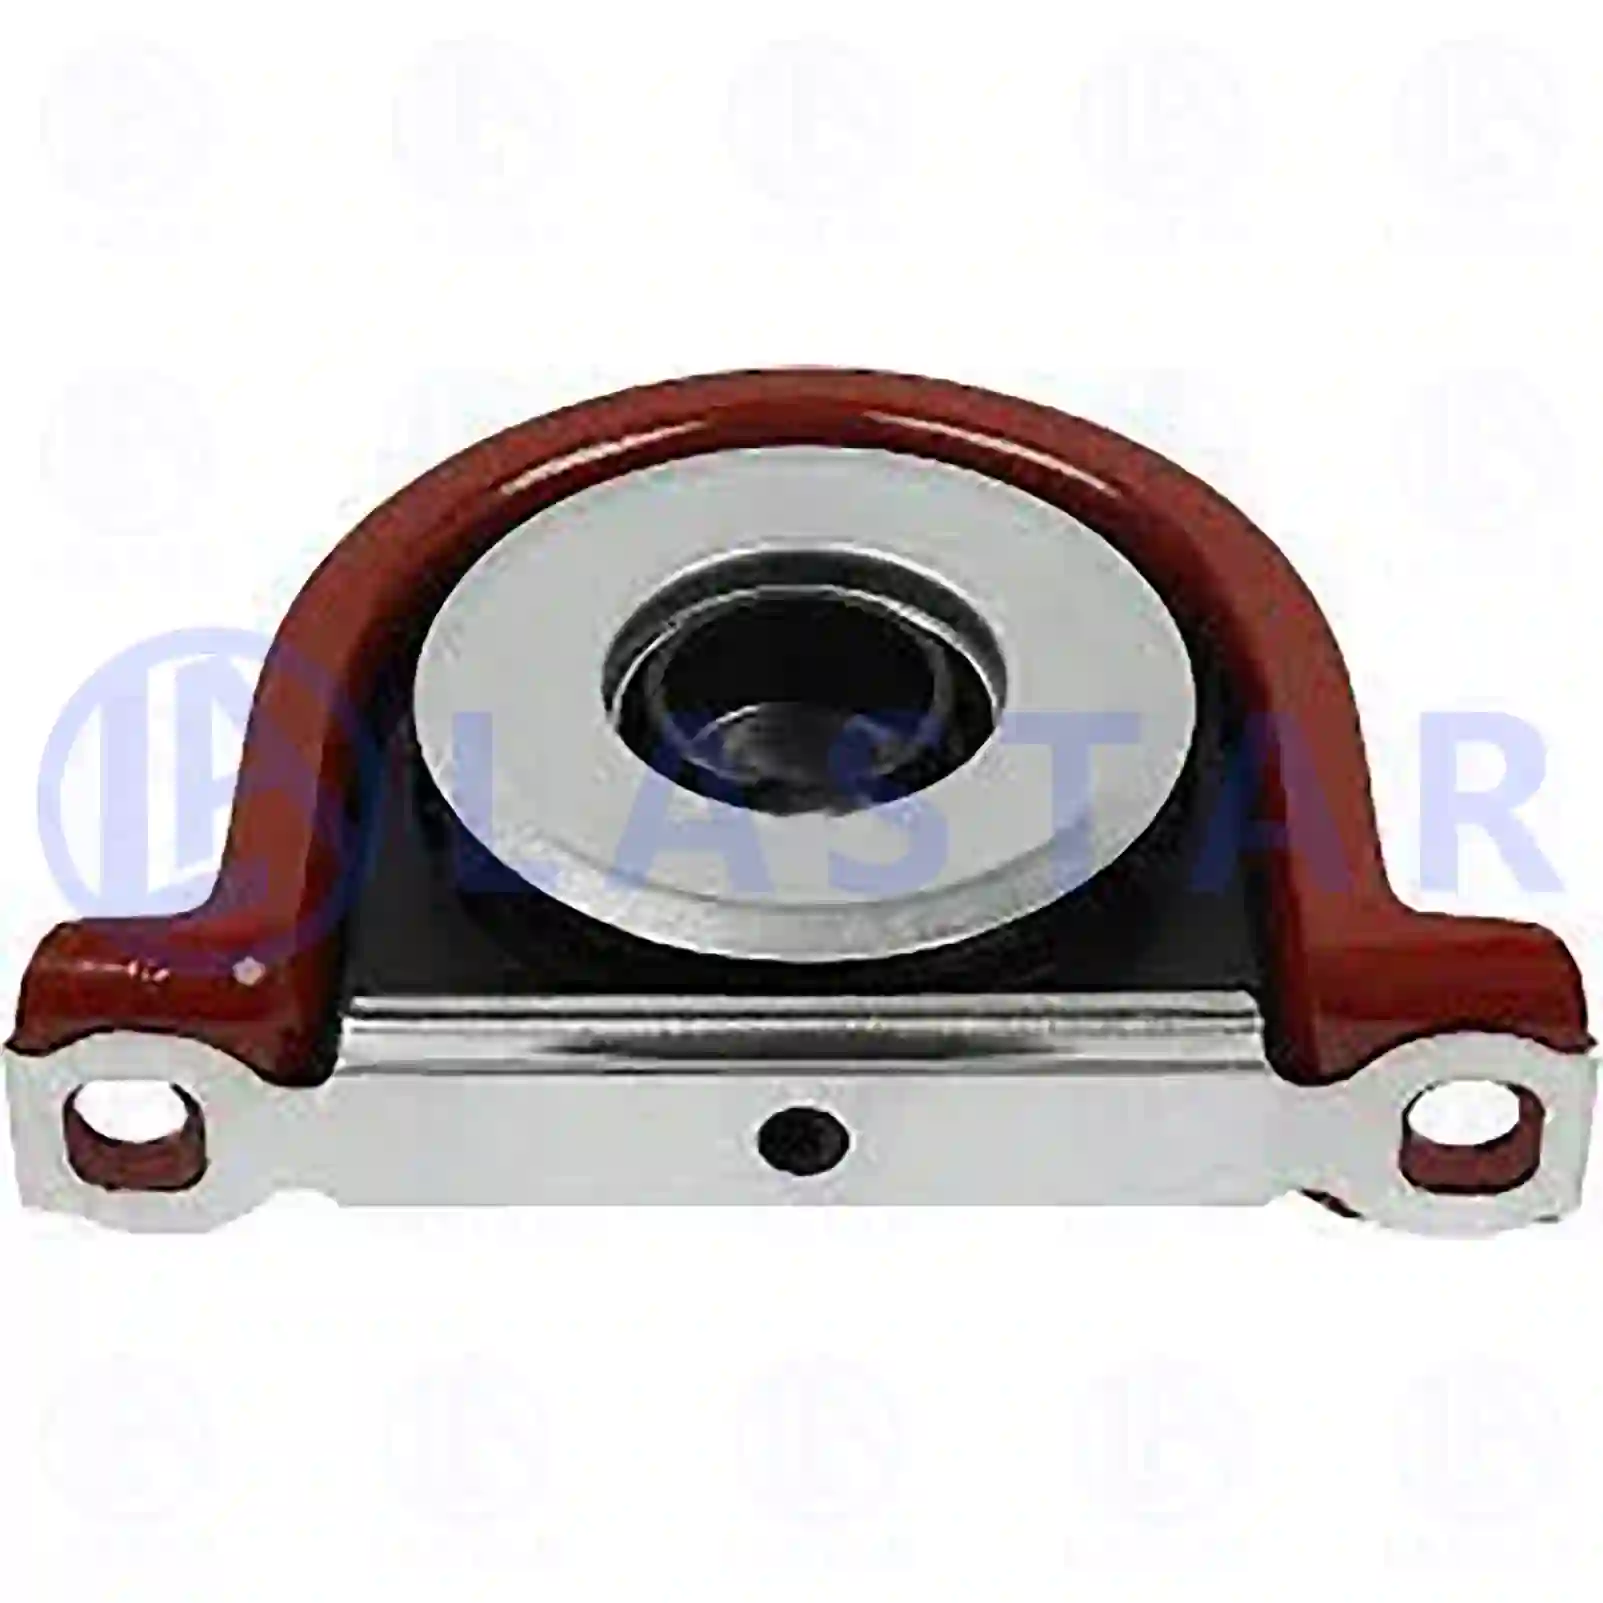 Center bearing, 77734126, 42536726, 9316032 ||  77734126 Lastar Spare Part | Truck Spare Parts, Auotomotive Spare Parts Center bearing, 77734126, 42536726, 9316032 ||  77734126 Lastar Spare Part | Truck Spare Parts, Auotomotive Spare Parts